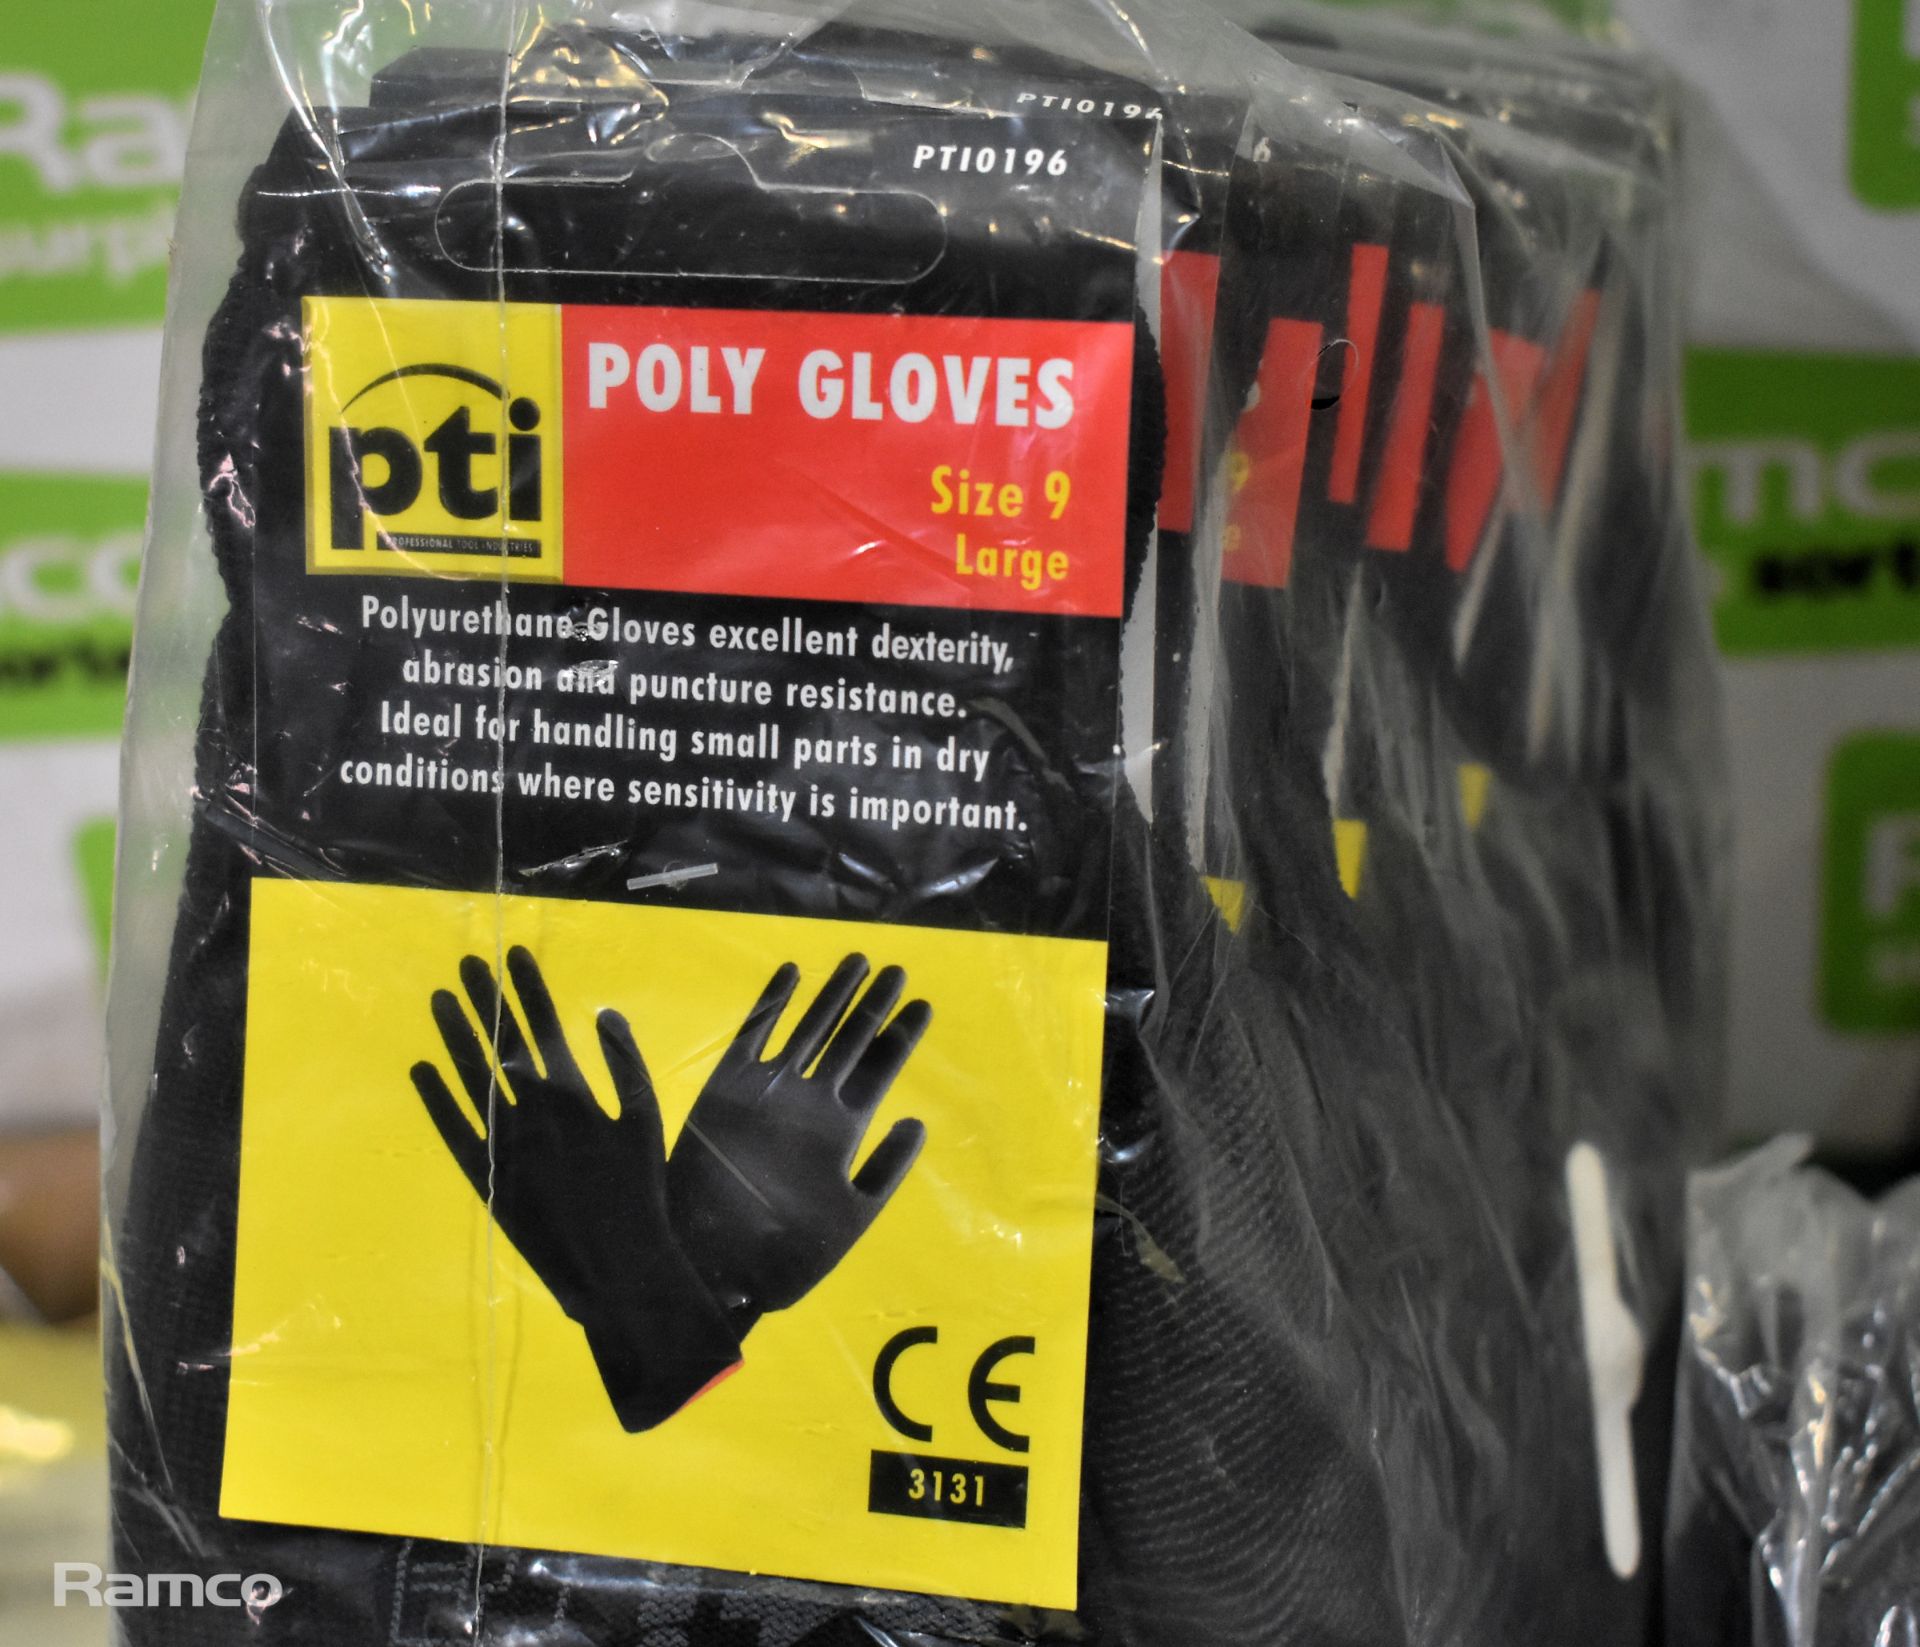 60x PTI poly gloves, 6x Kleenguard coveralls XL, 20x Hilka 5 piece open ended spanner sets - Image 6 of 8